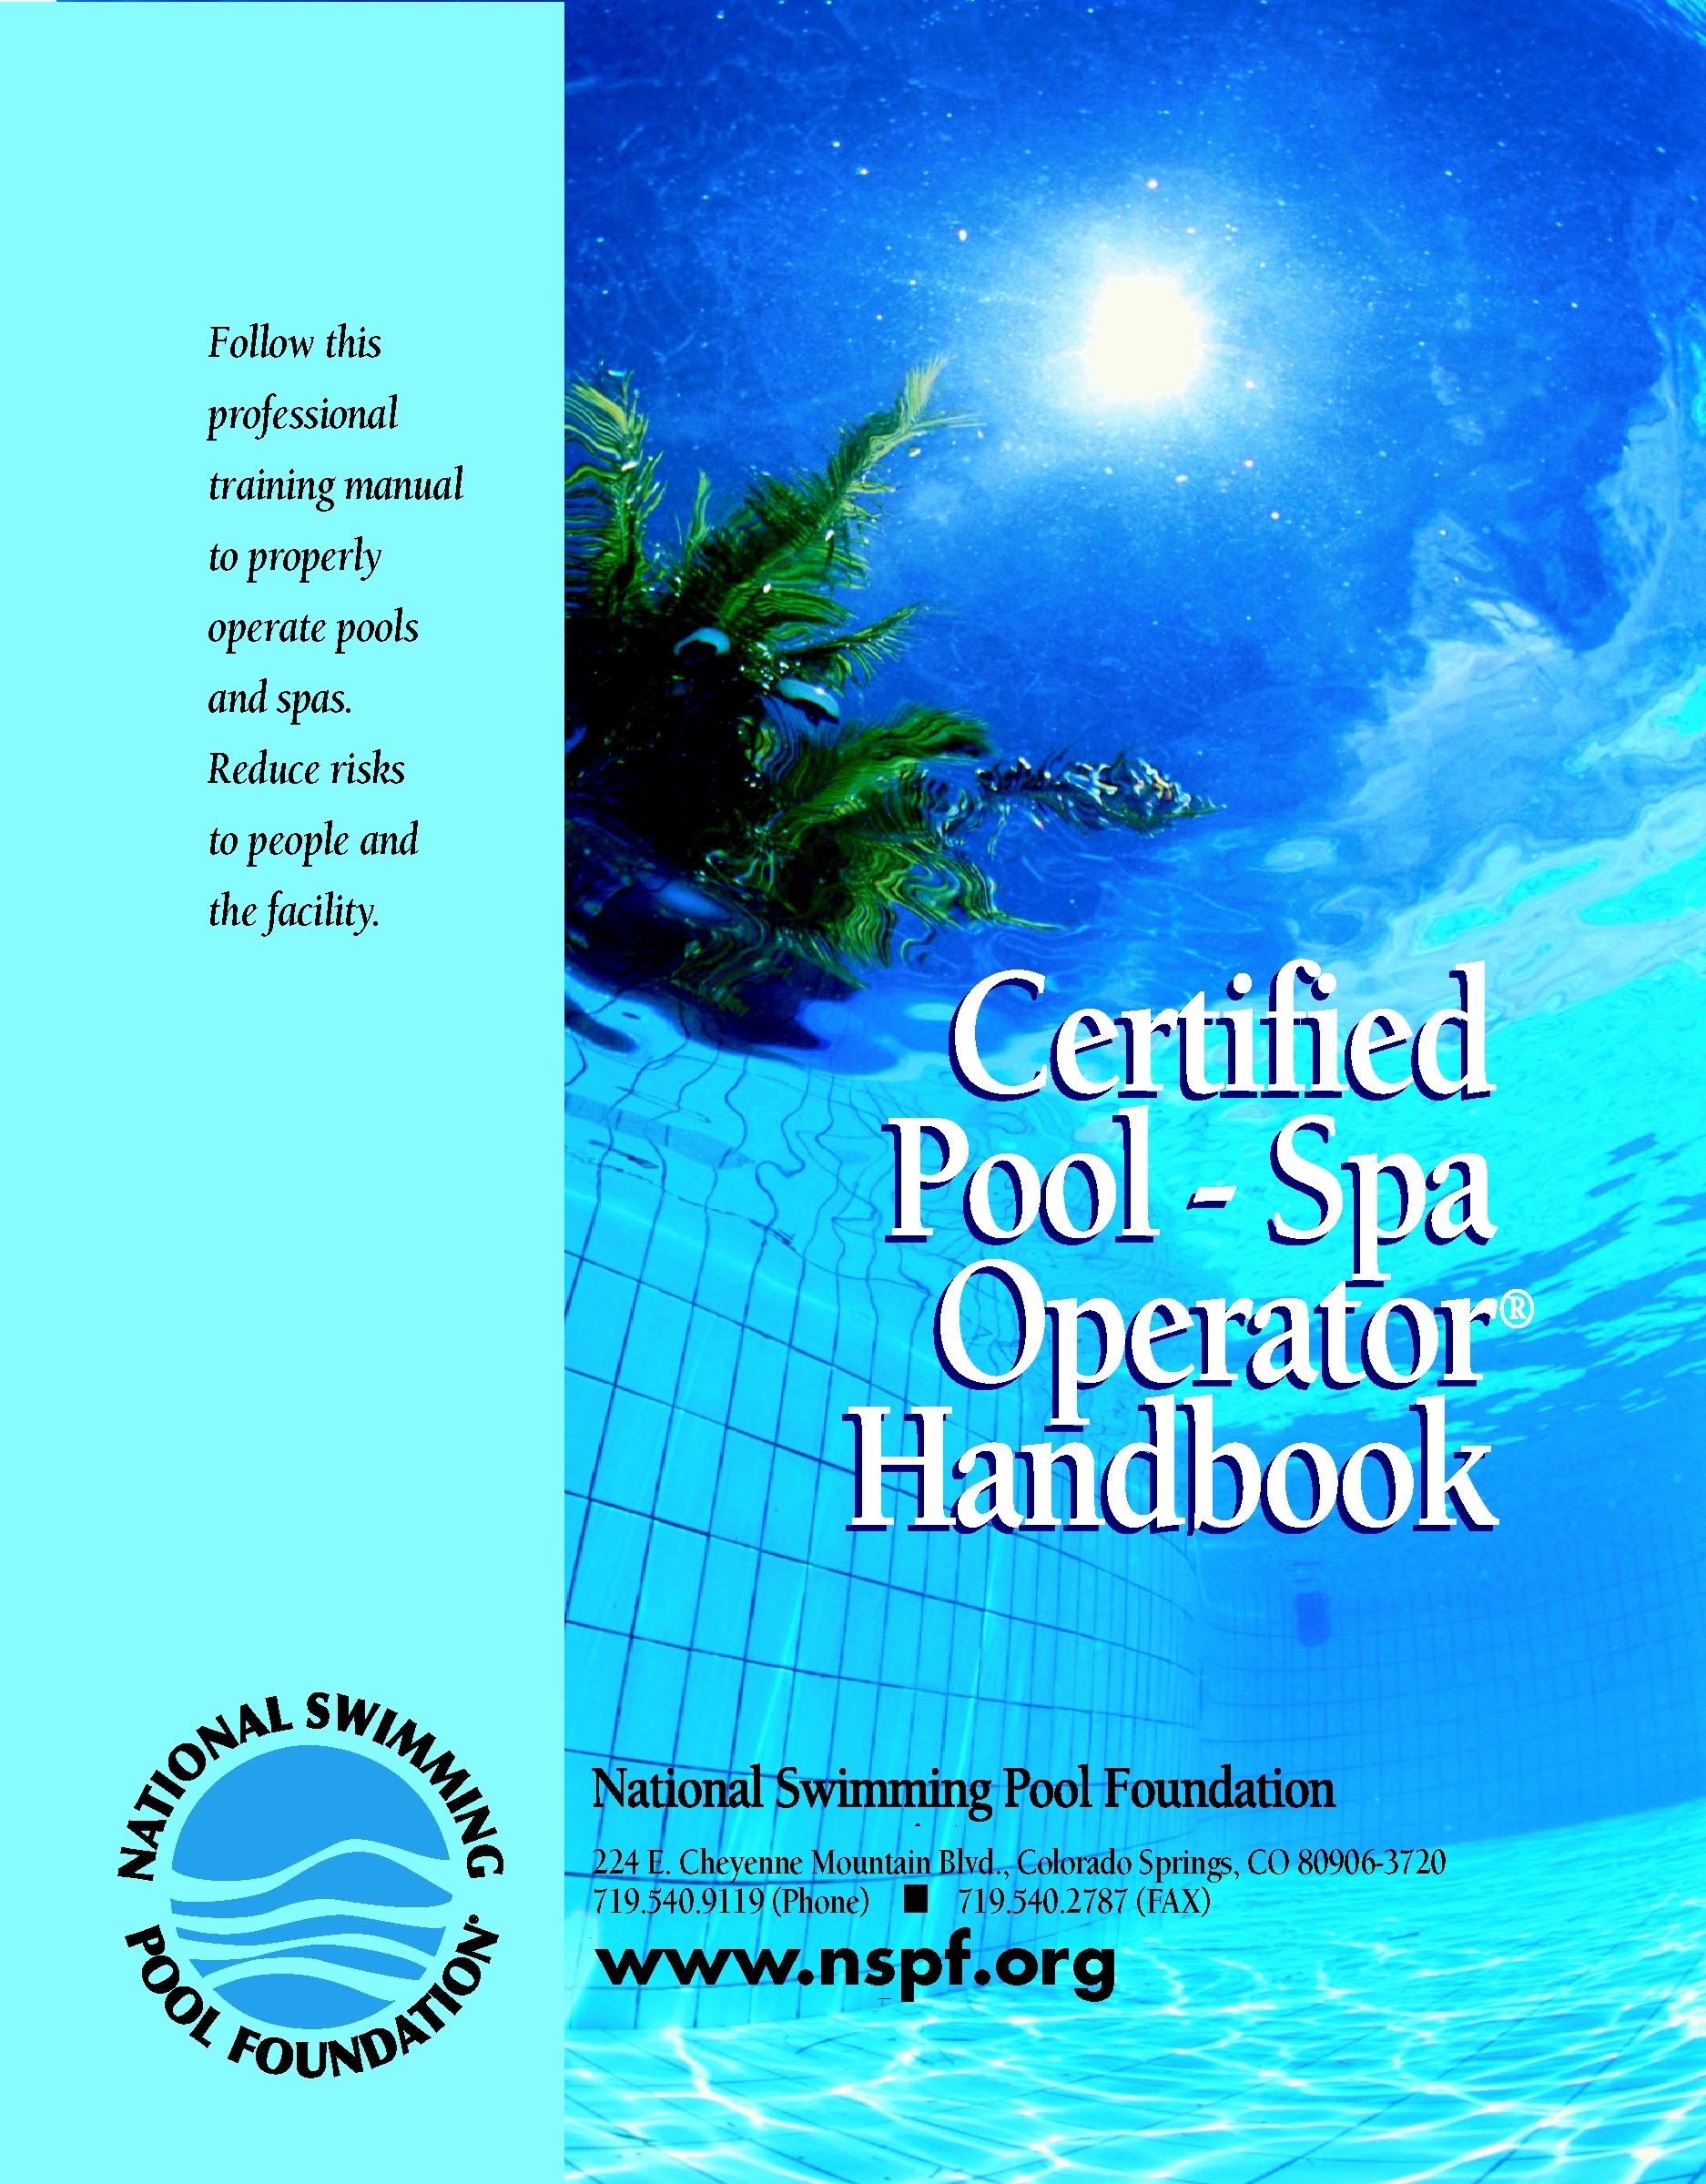 All New Certified Pool Spa OperatorÂ® Handbook Introduced The Most